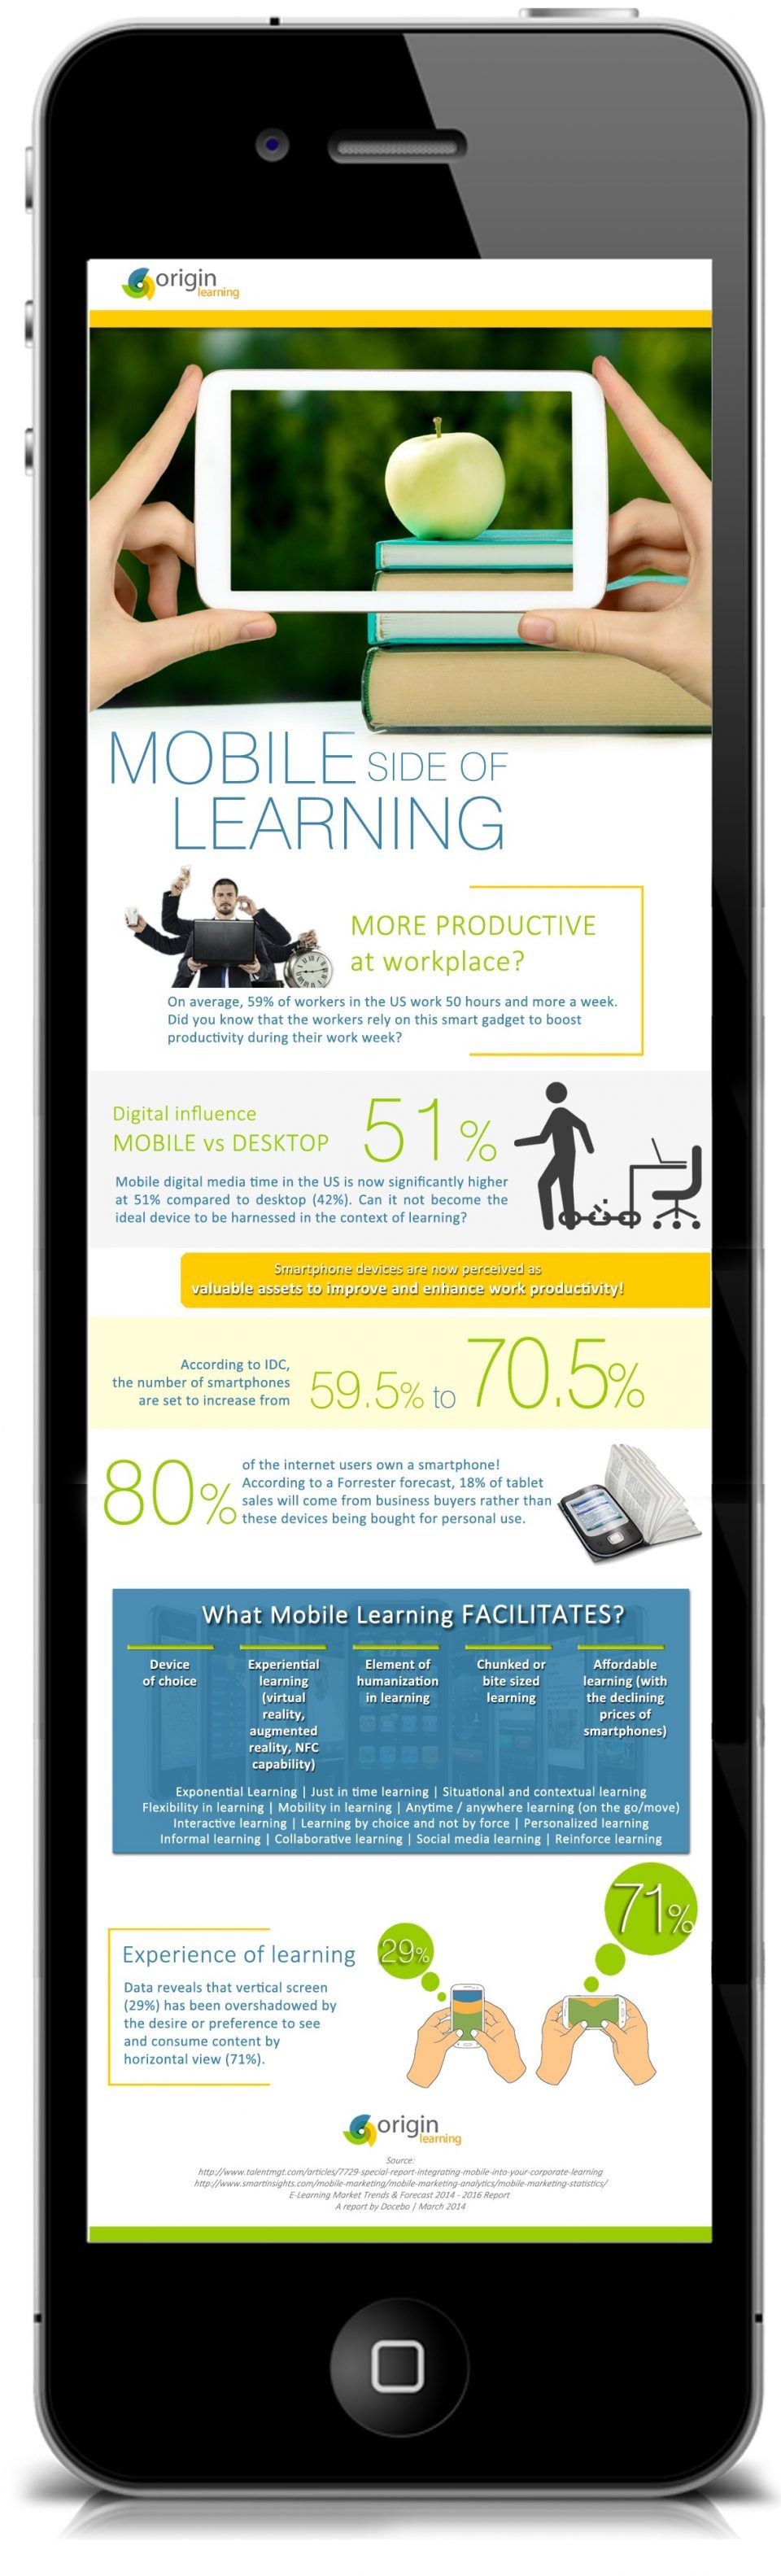 The Mobile Side of Learning Infographic